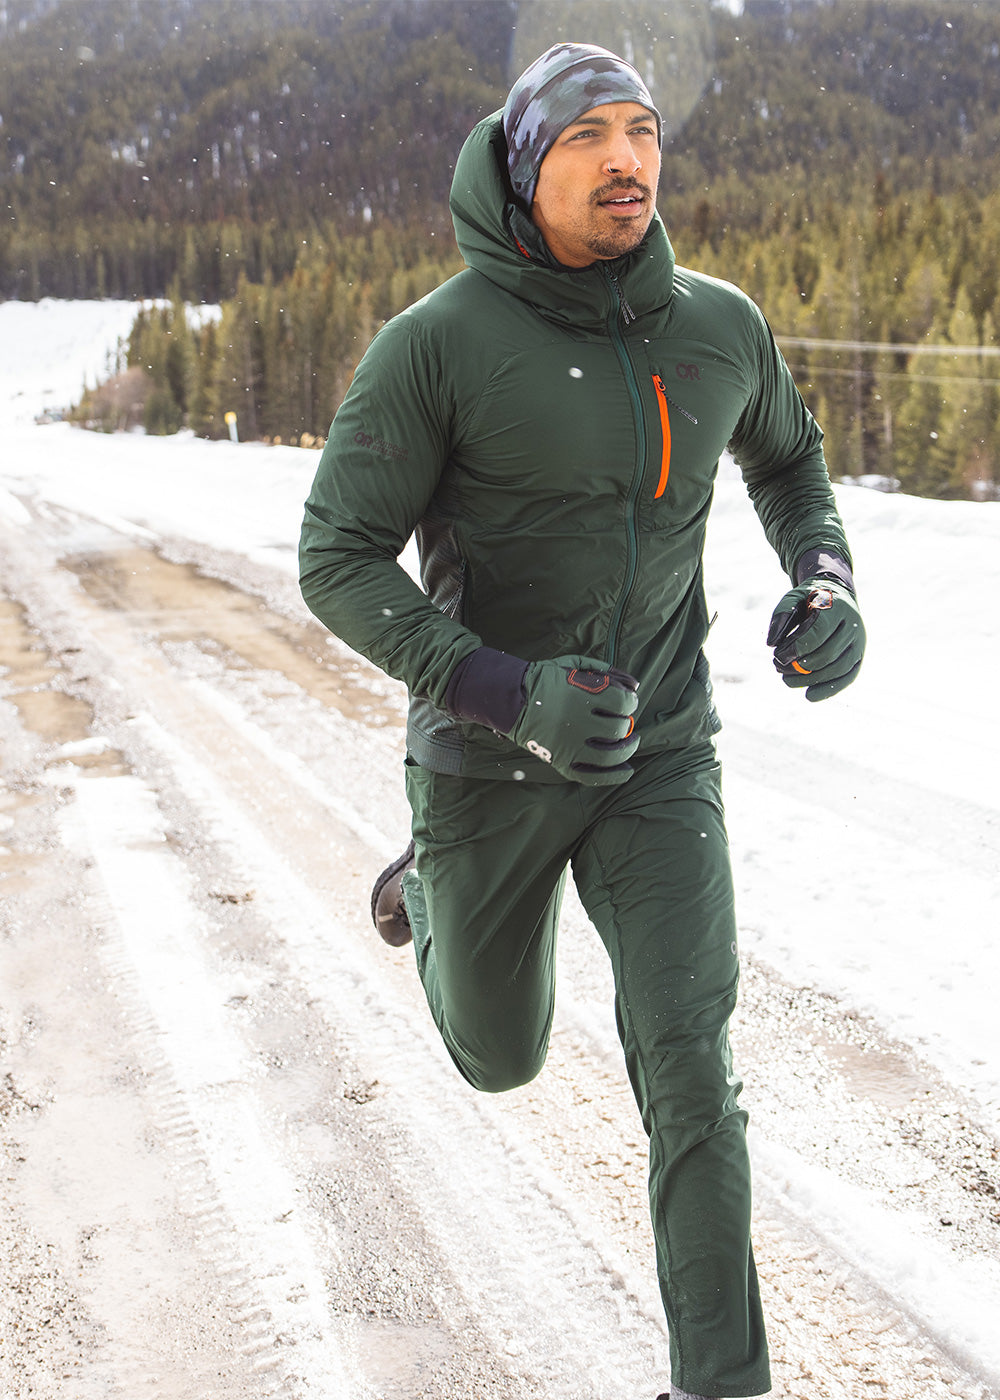 A Complete Winter Running Outfit